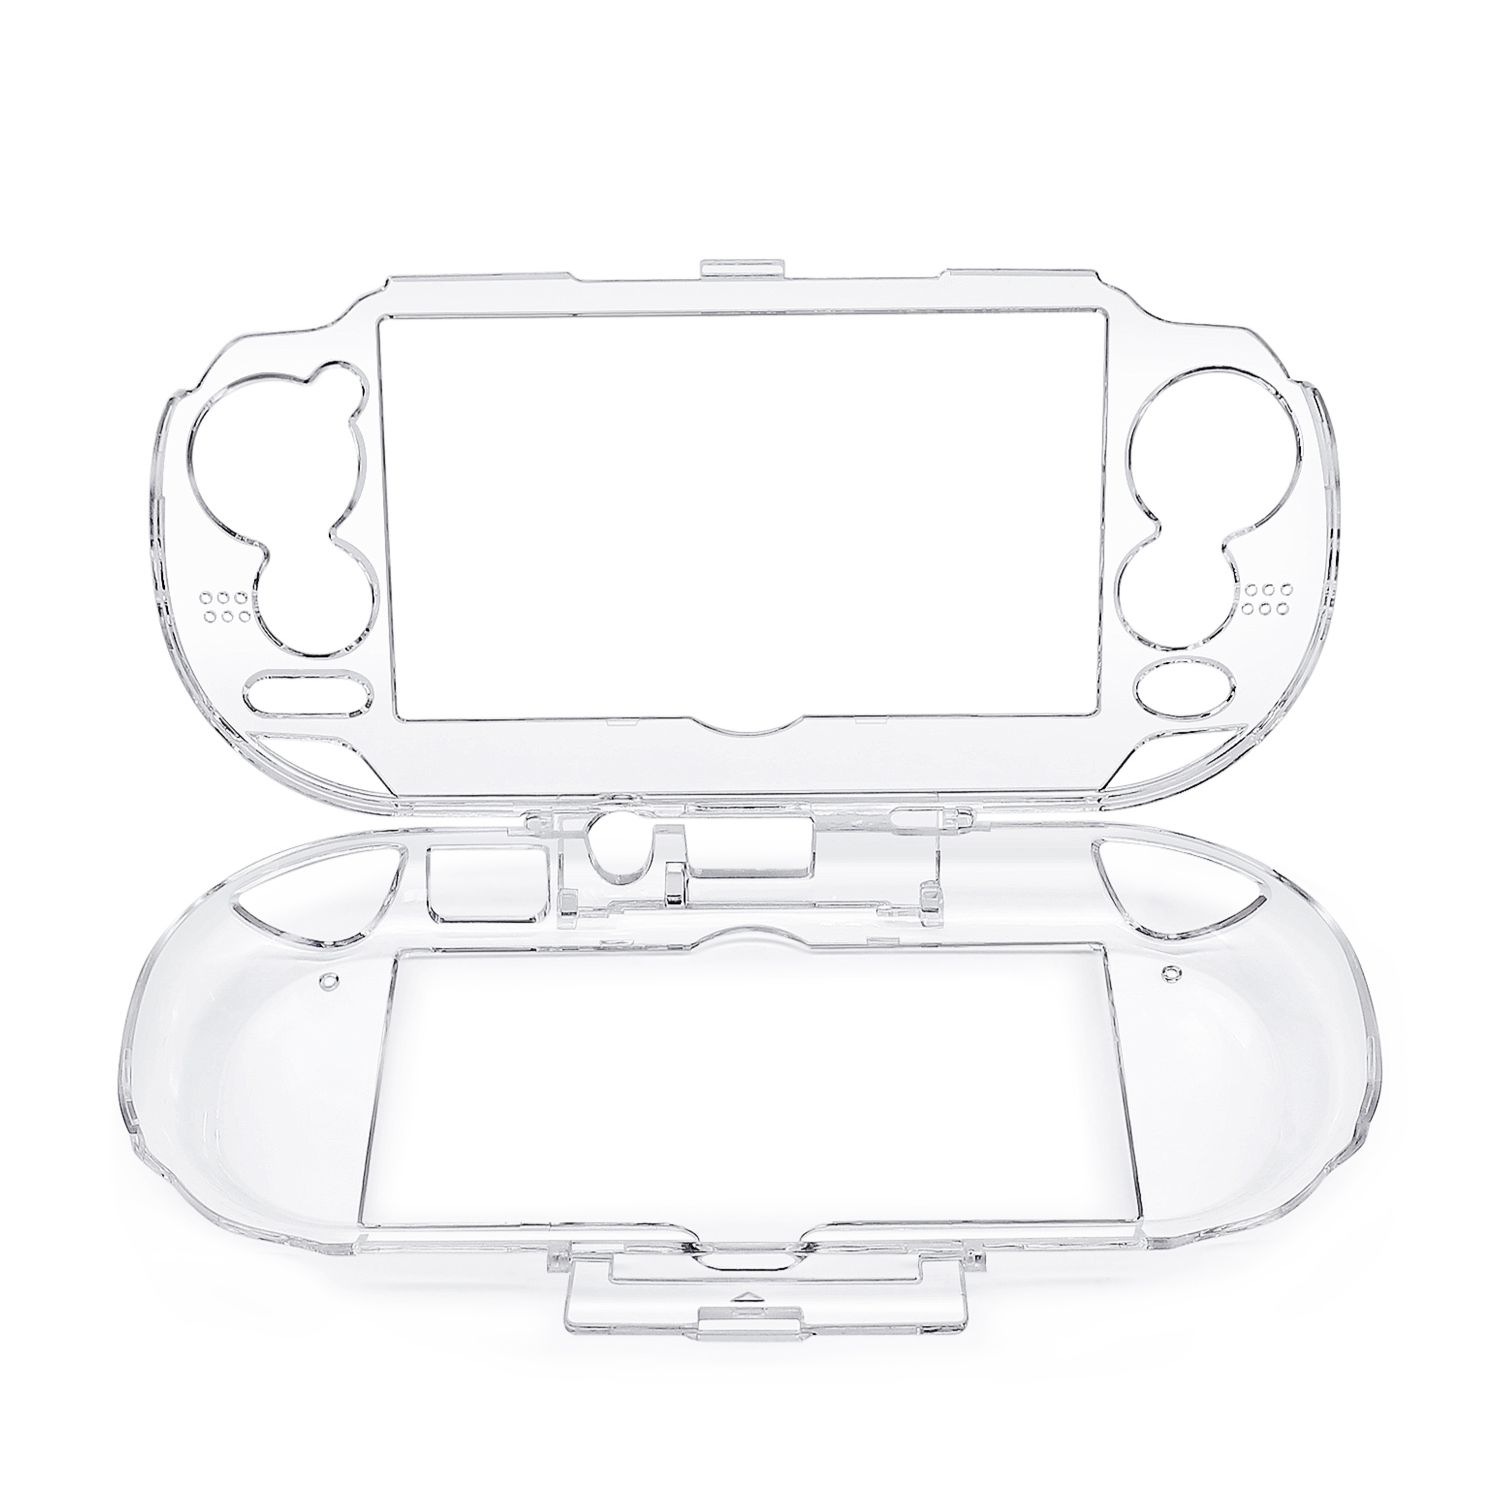 TNP Clear Hard Case for PS Vita 1000 - Protective Transparent Hard Case for Sony PSV 1000, Full Cover Crystal Clear Hard Case for PSVita PCH 1000 Model, Snap-in Protector Cover Case with Clear Display